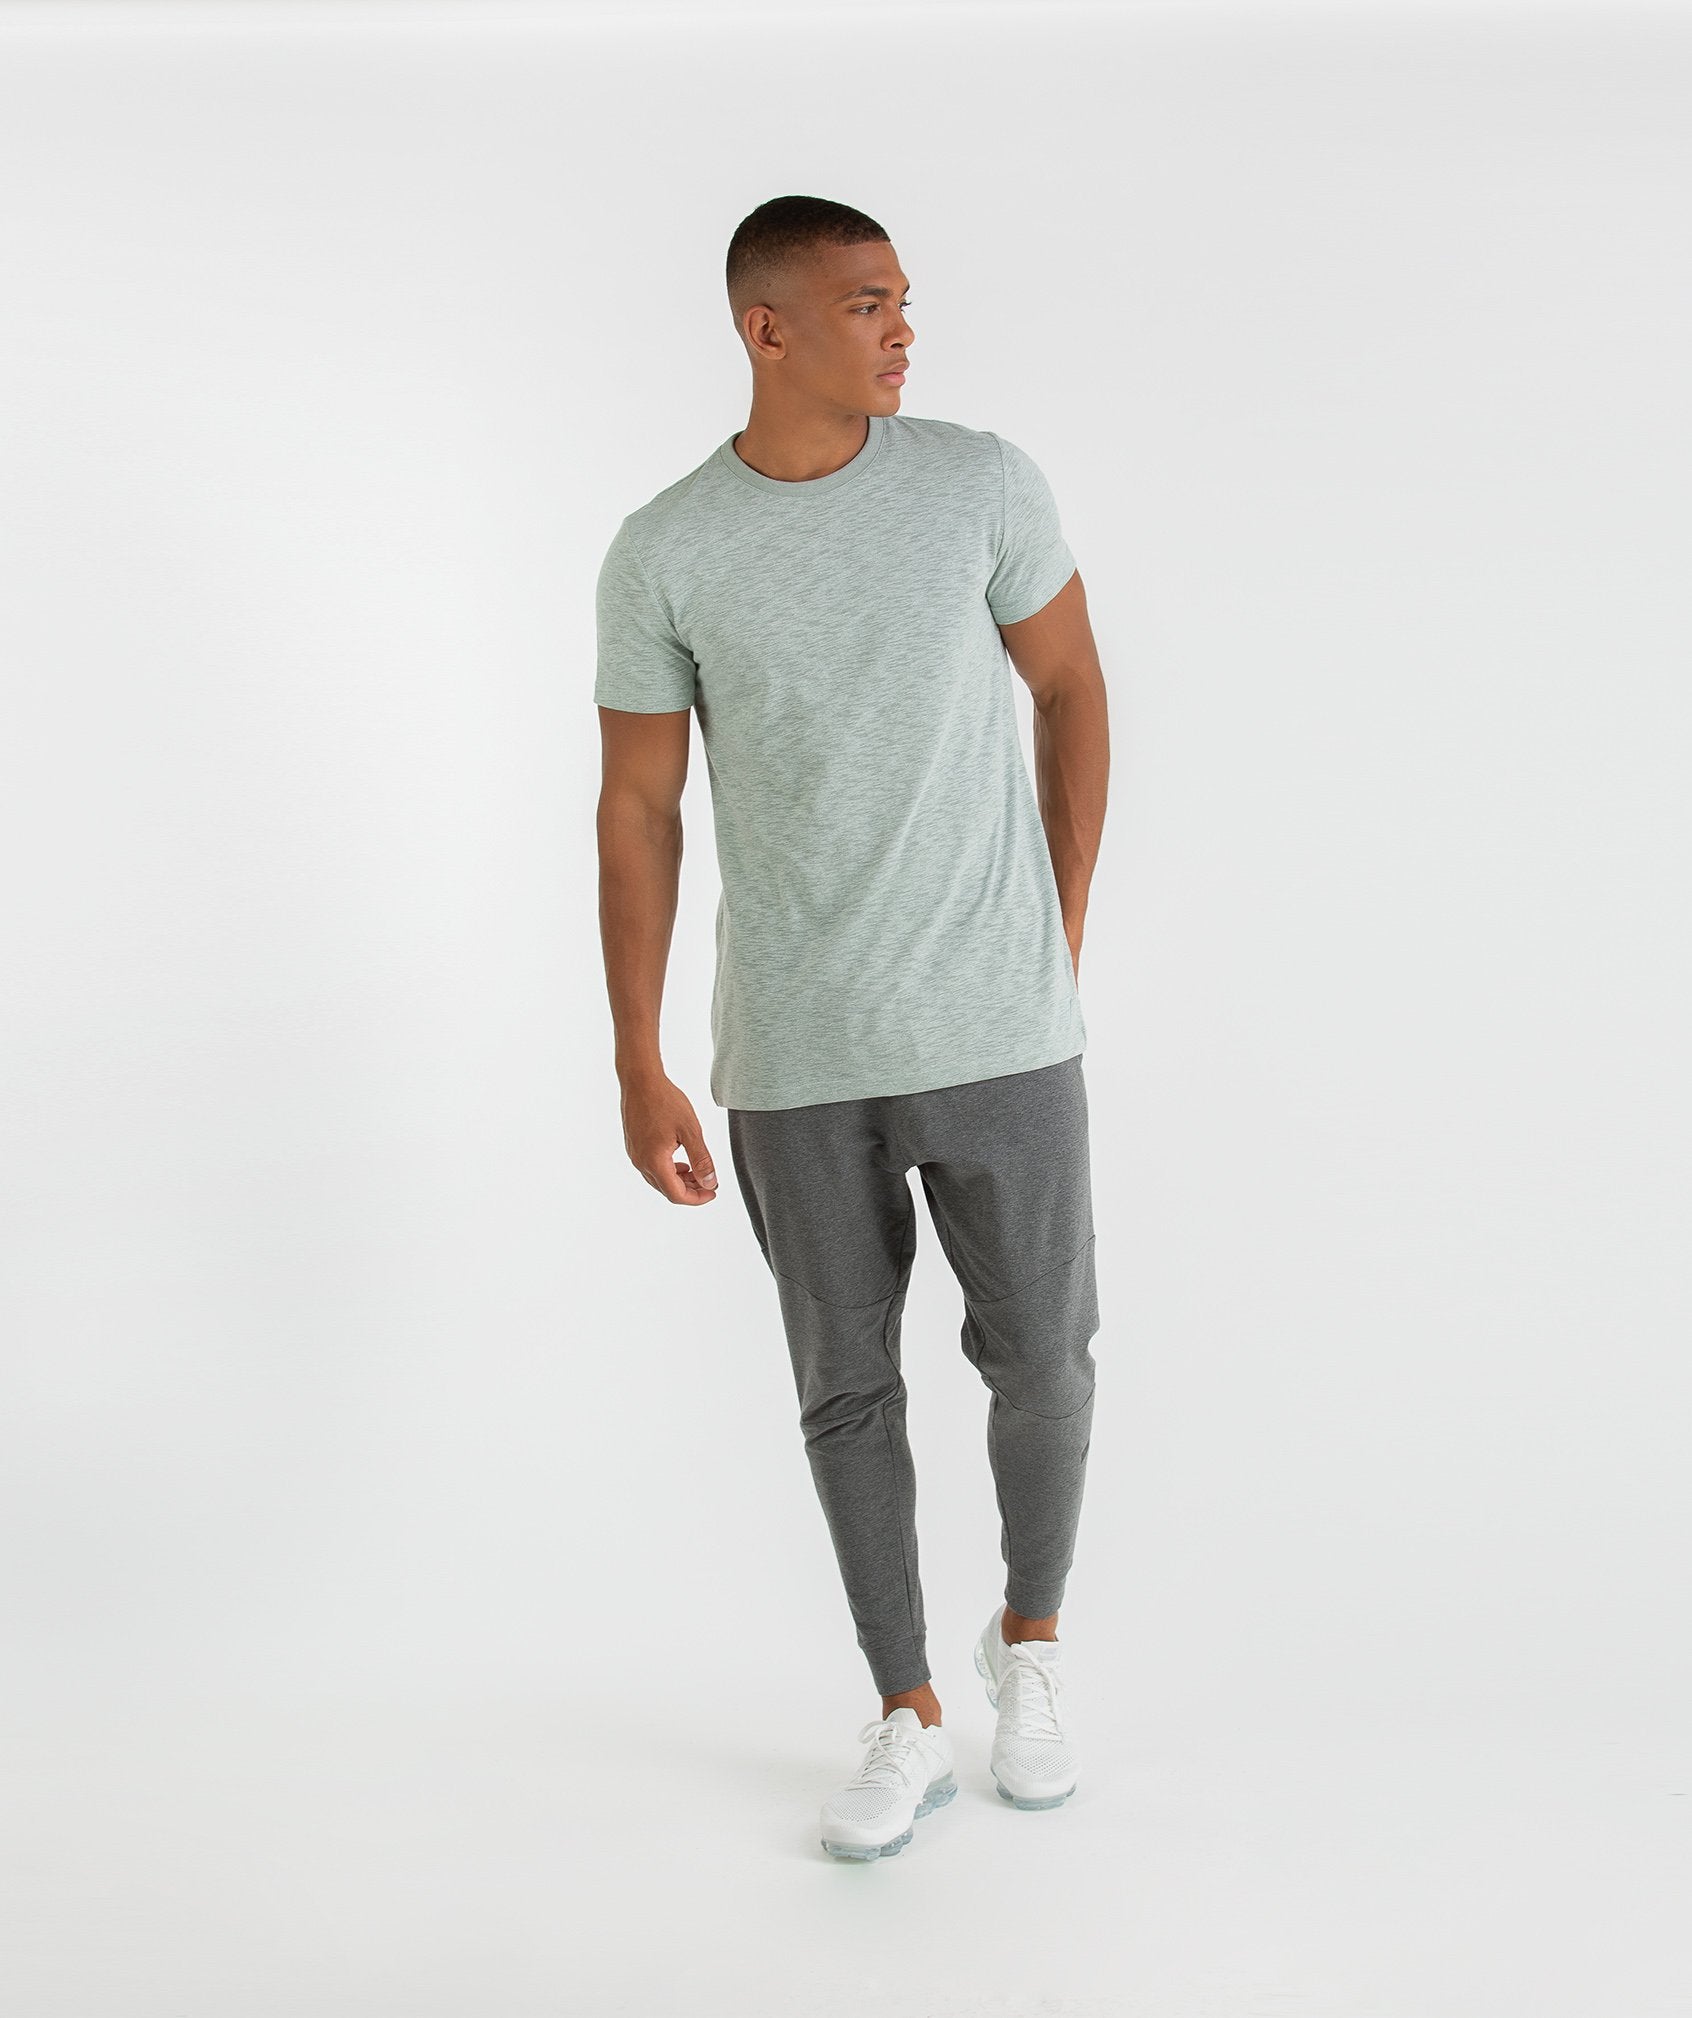 Heather T-Shirt in Autumn Green Marl - view 4